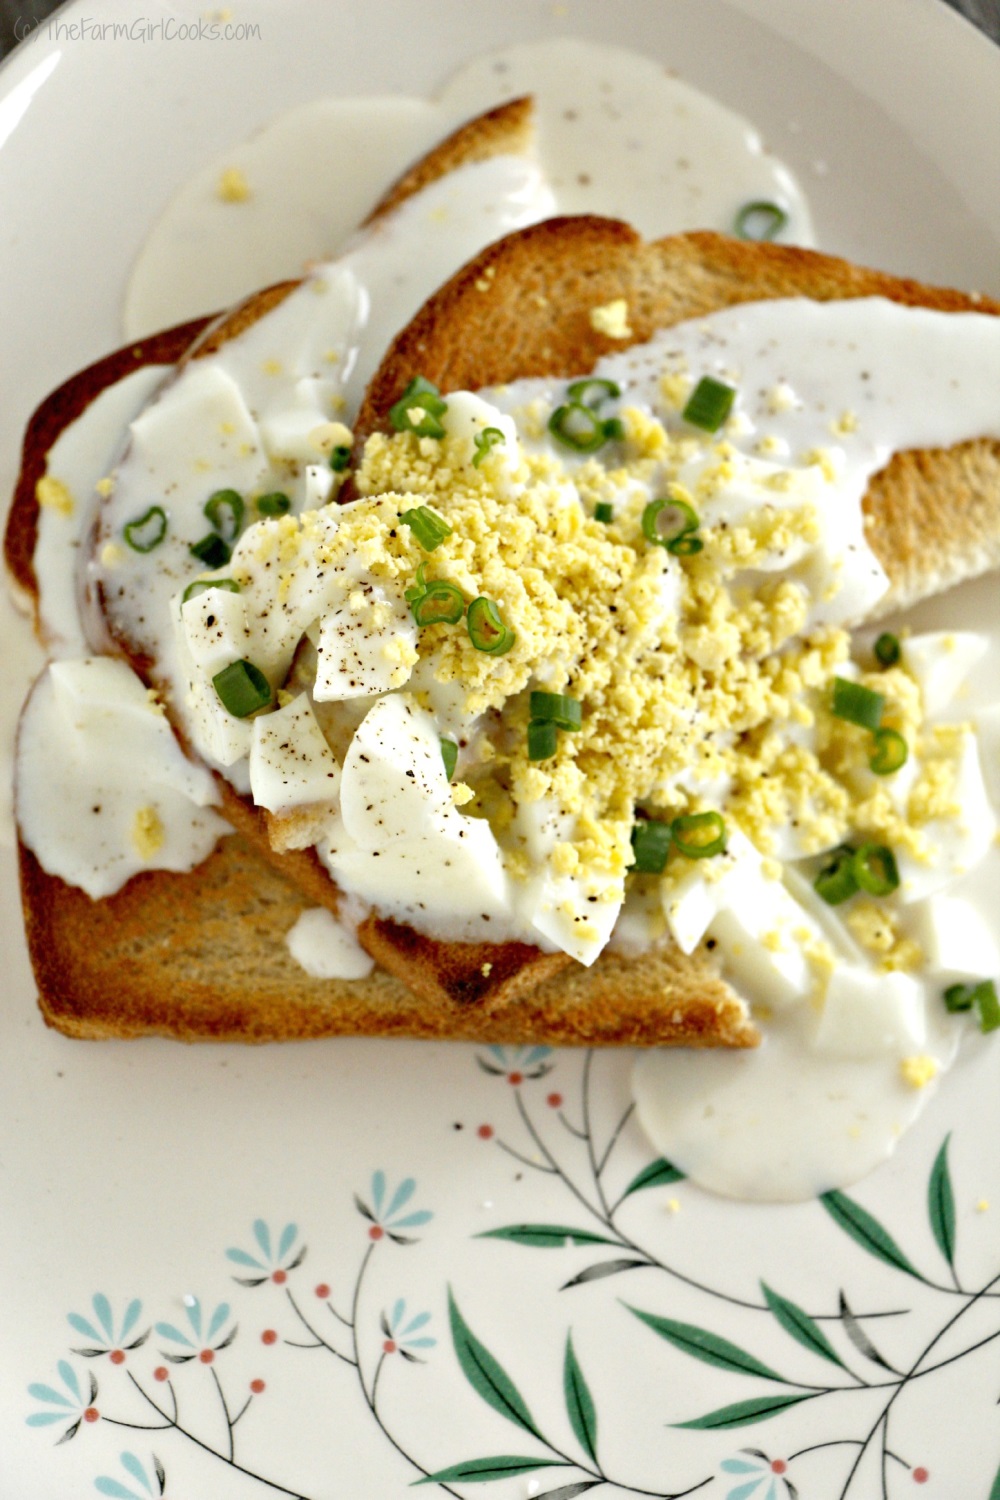 Eggs Goldenrod or How To Make a White Sauce Worth Making